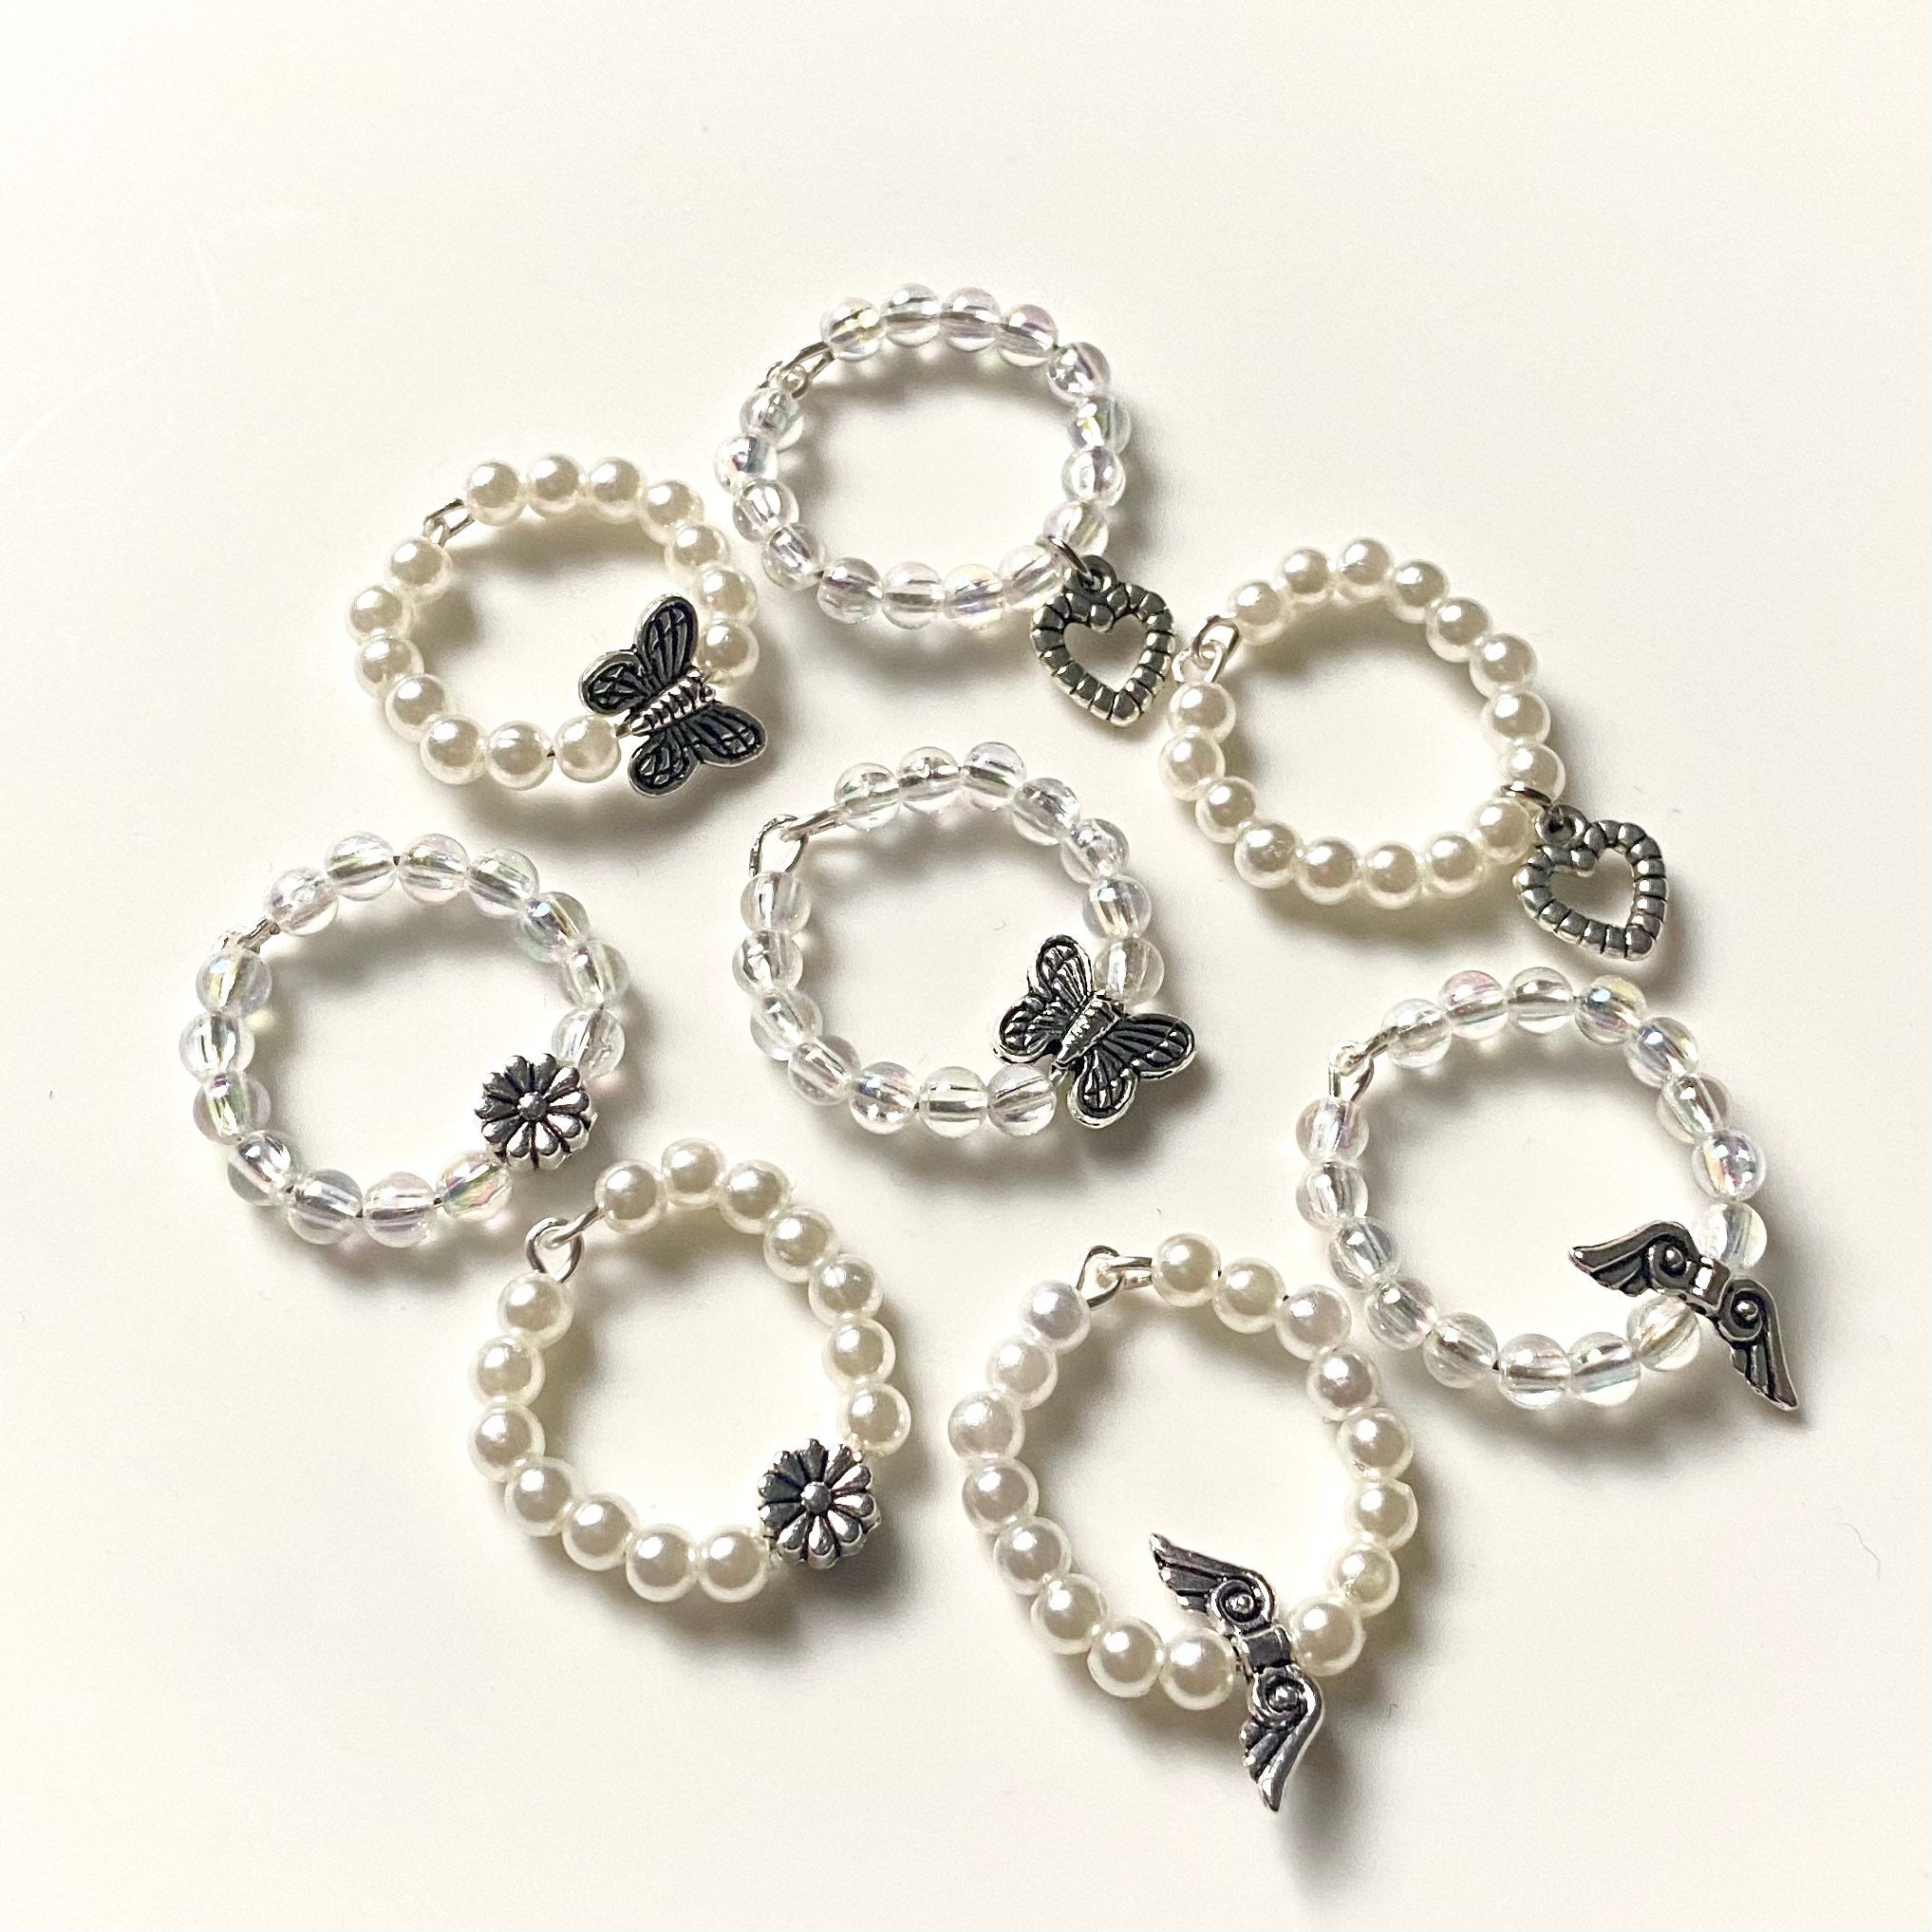 Black and White Grunge Mismatched Bead Bracelet / Dice, 8 Ball, Crystals,  Heart Y2k 